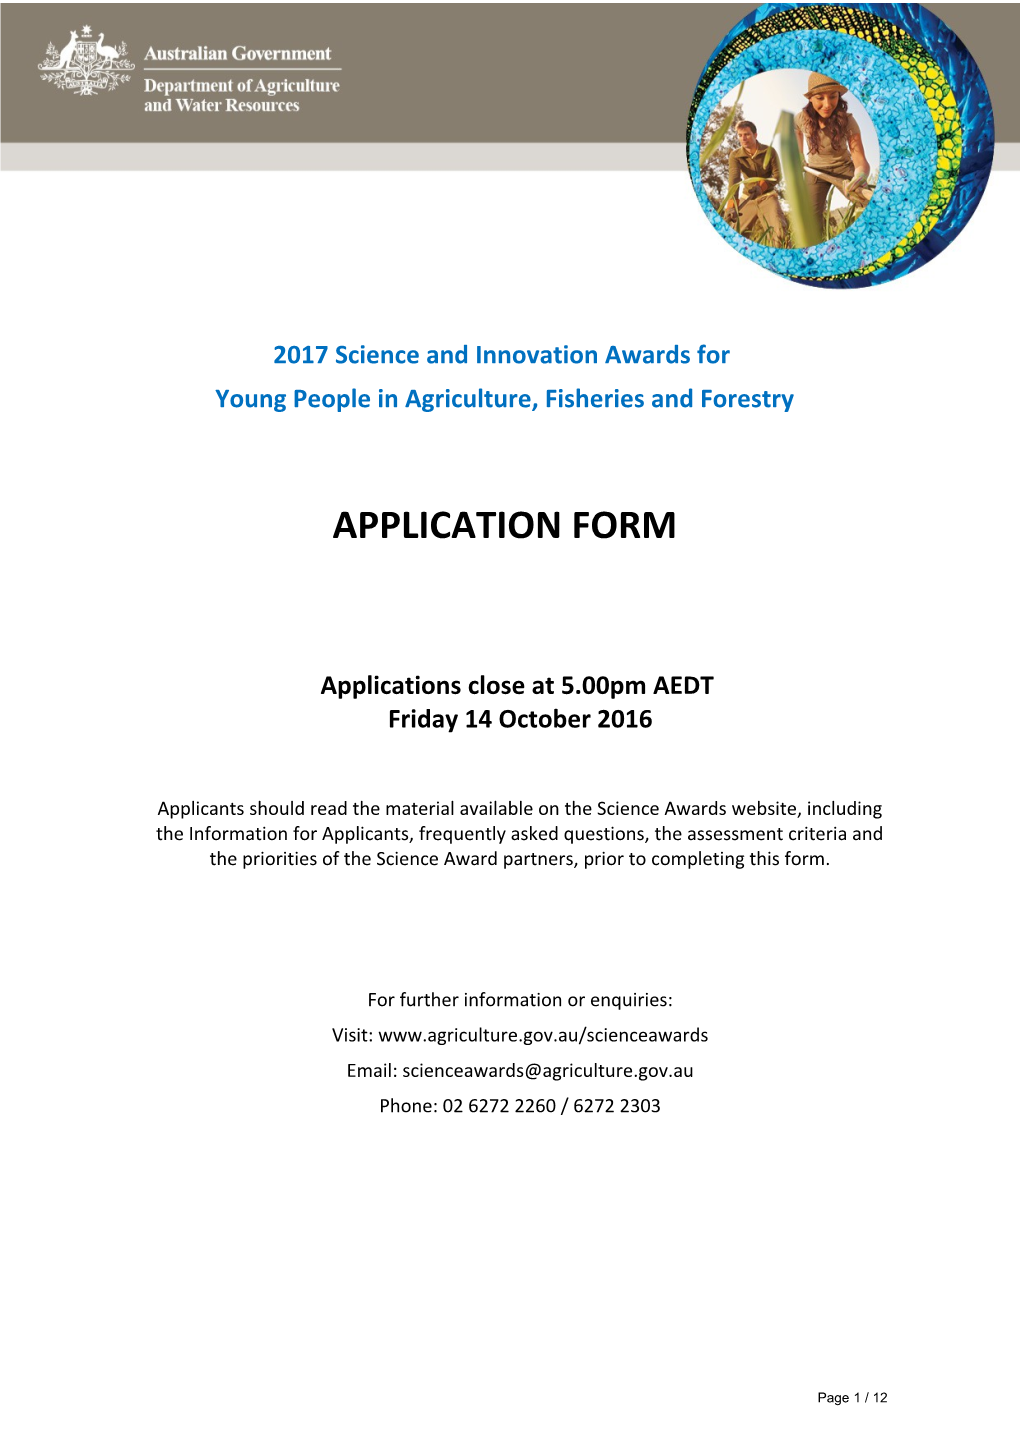 2017 Science and Innovation Awards for Young People in Agriculture, Fisheries and Forestry